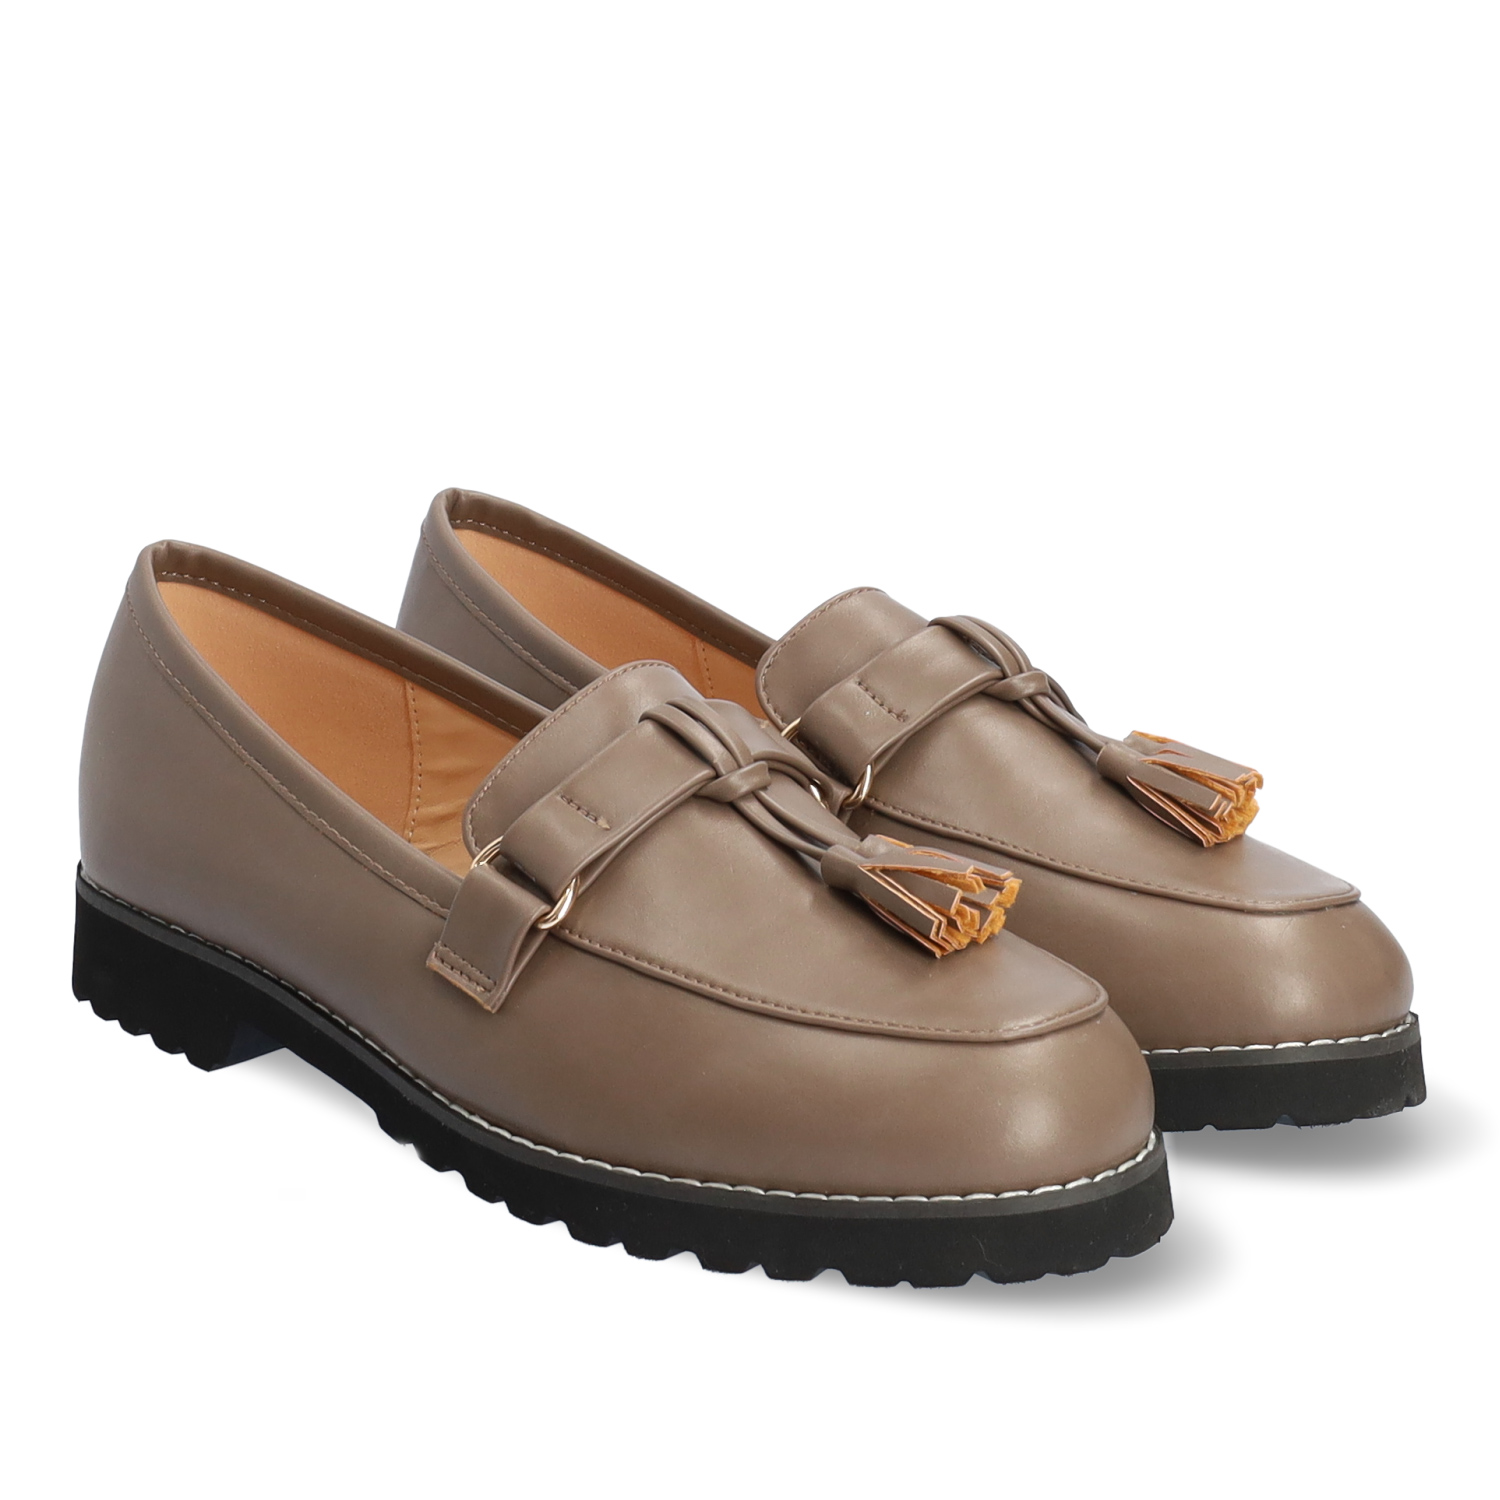 Moccasins in light brown faux leather and tassle 